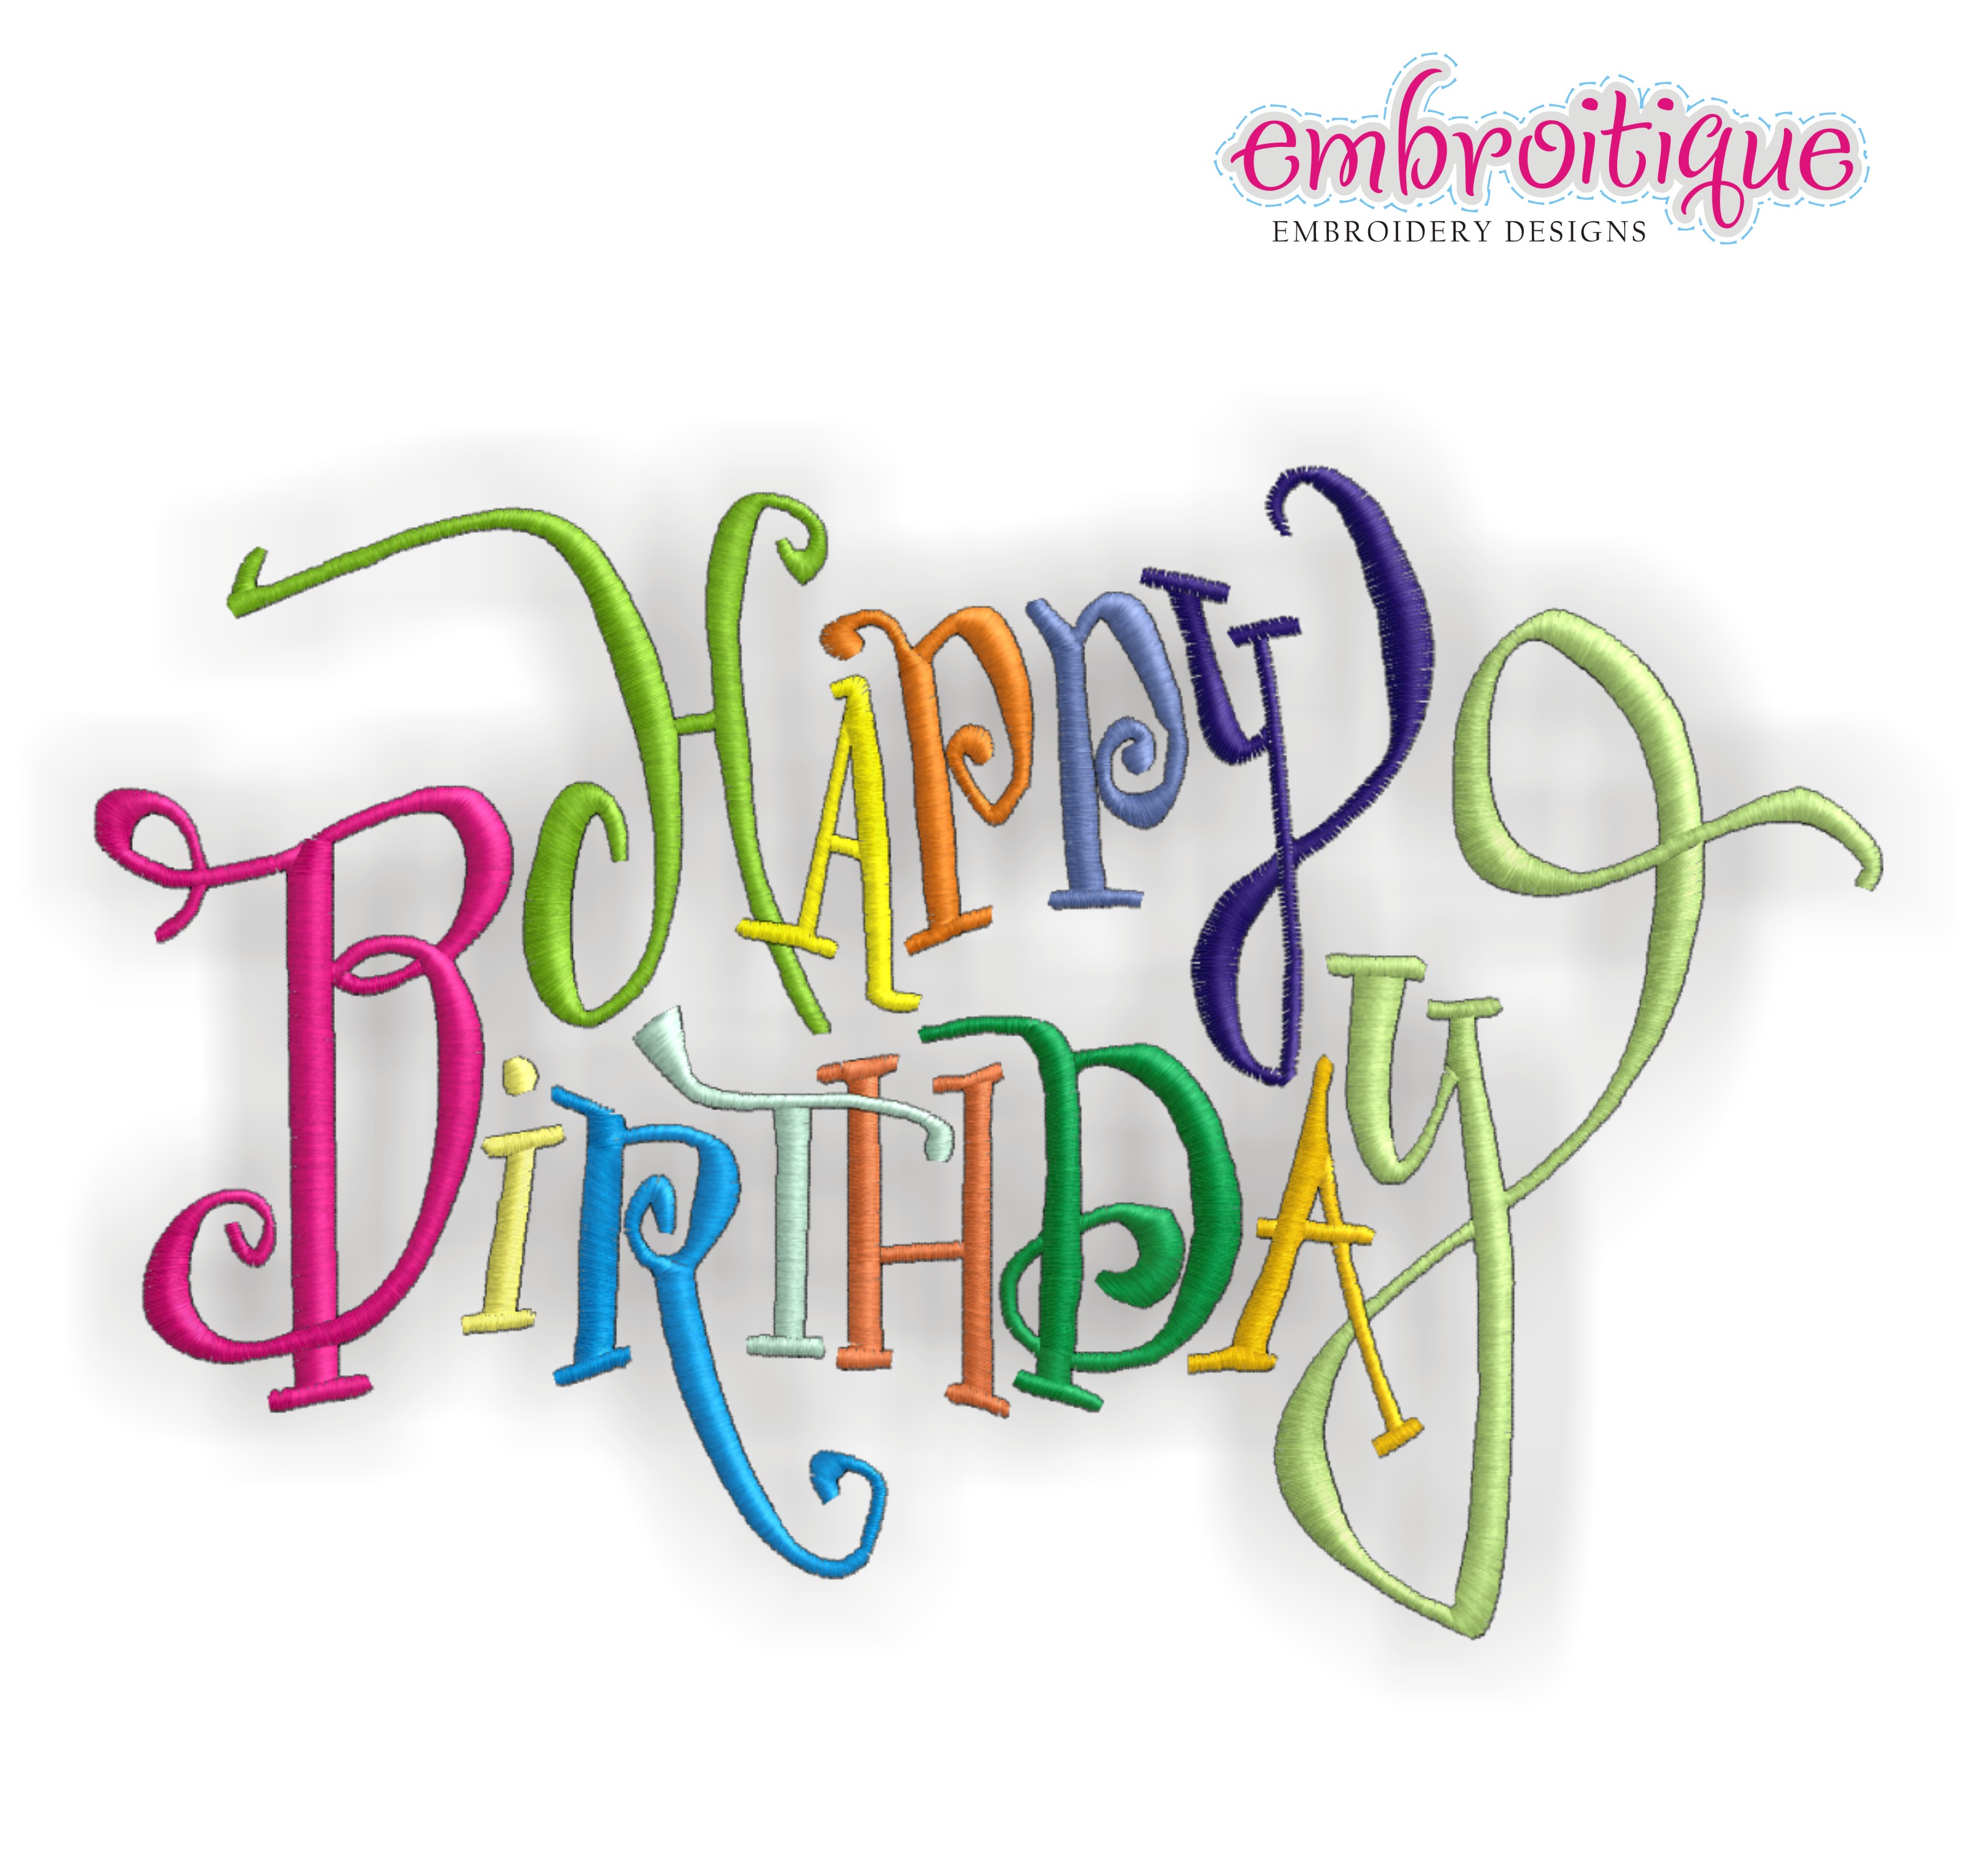 Free Happy Birthday Fonts Download Free Clip Art Free Clip Art On Clipart Library